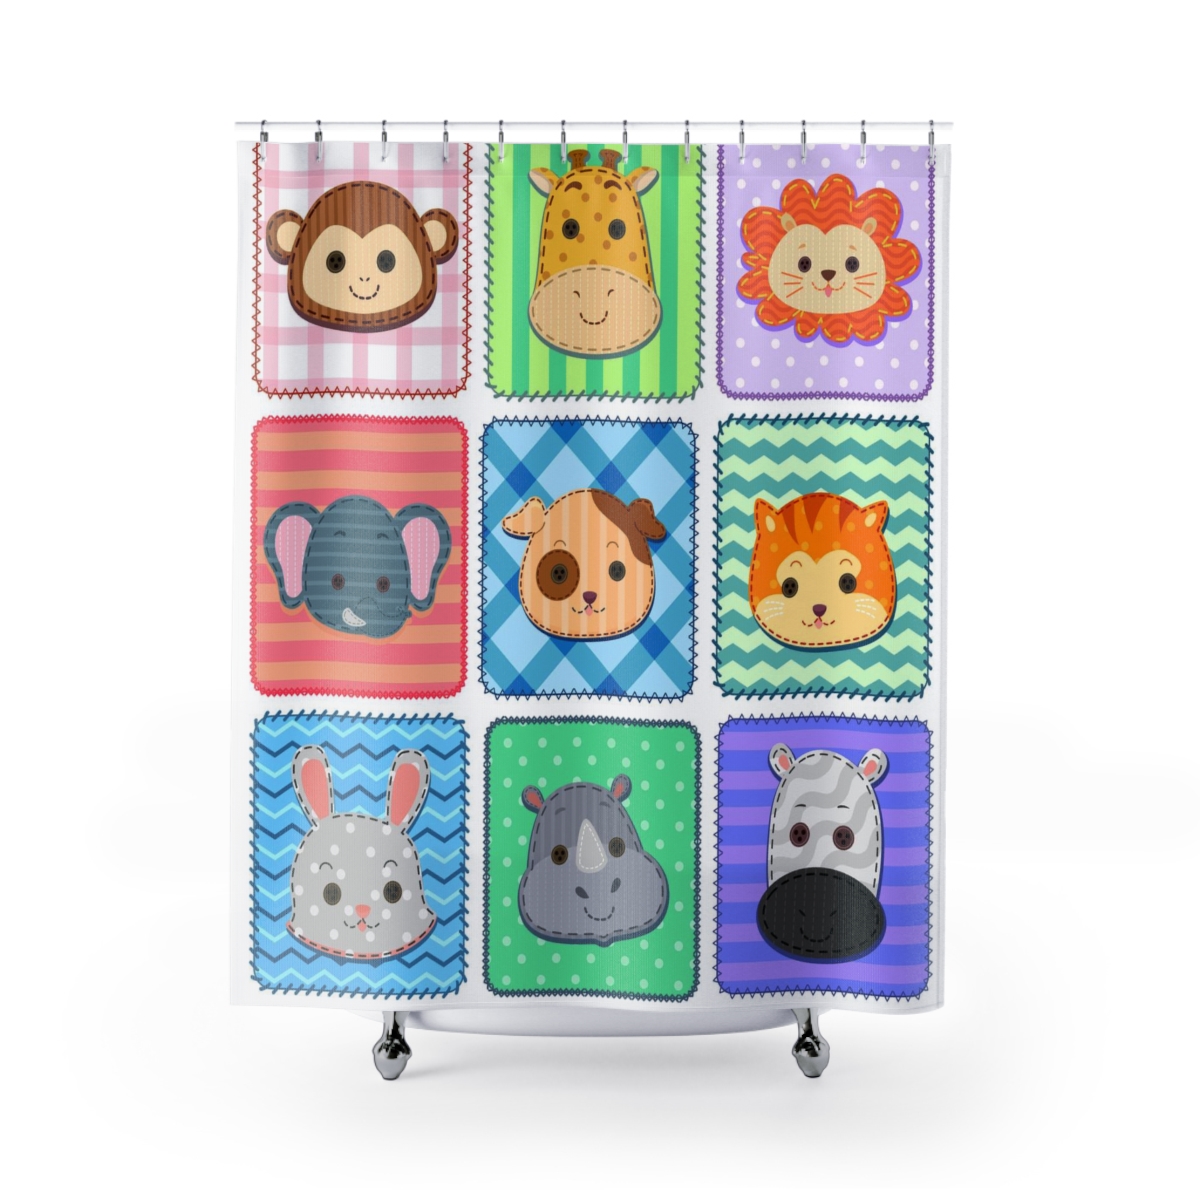 Shower Curtains product thumbnail image